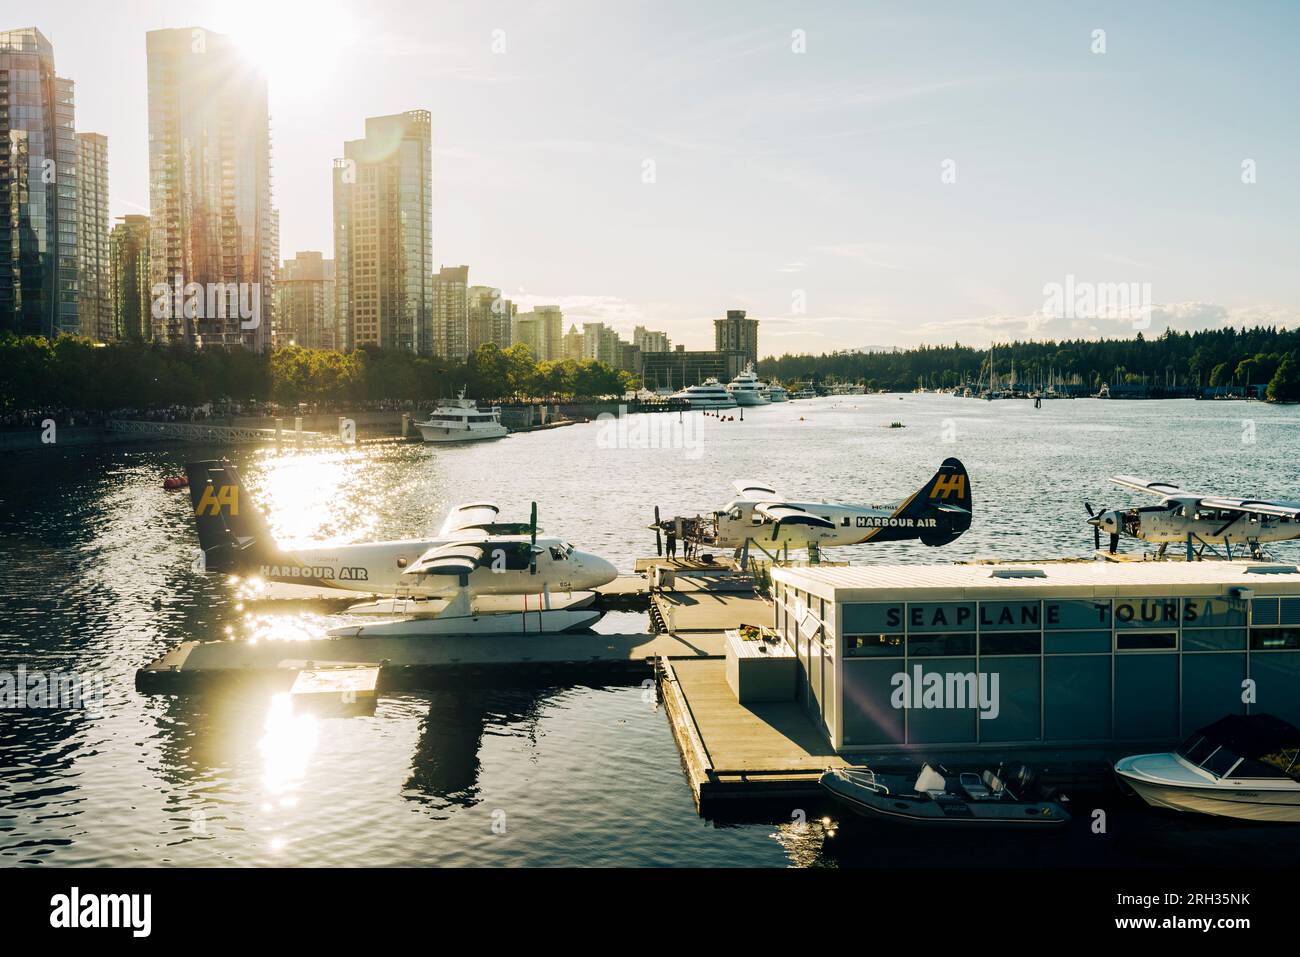 Float planes are moored at the jetty with the skyscrapers of Vancouver in the background in Canada Stock Photo